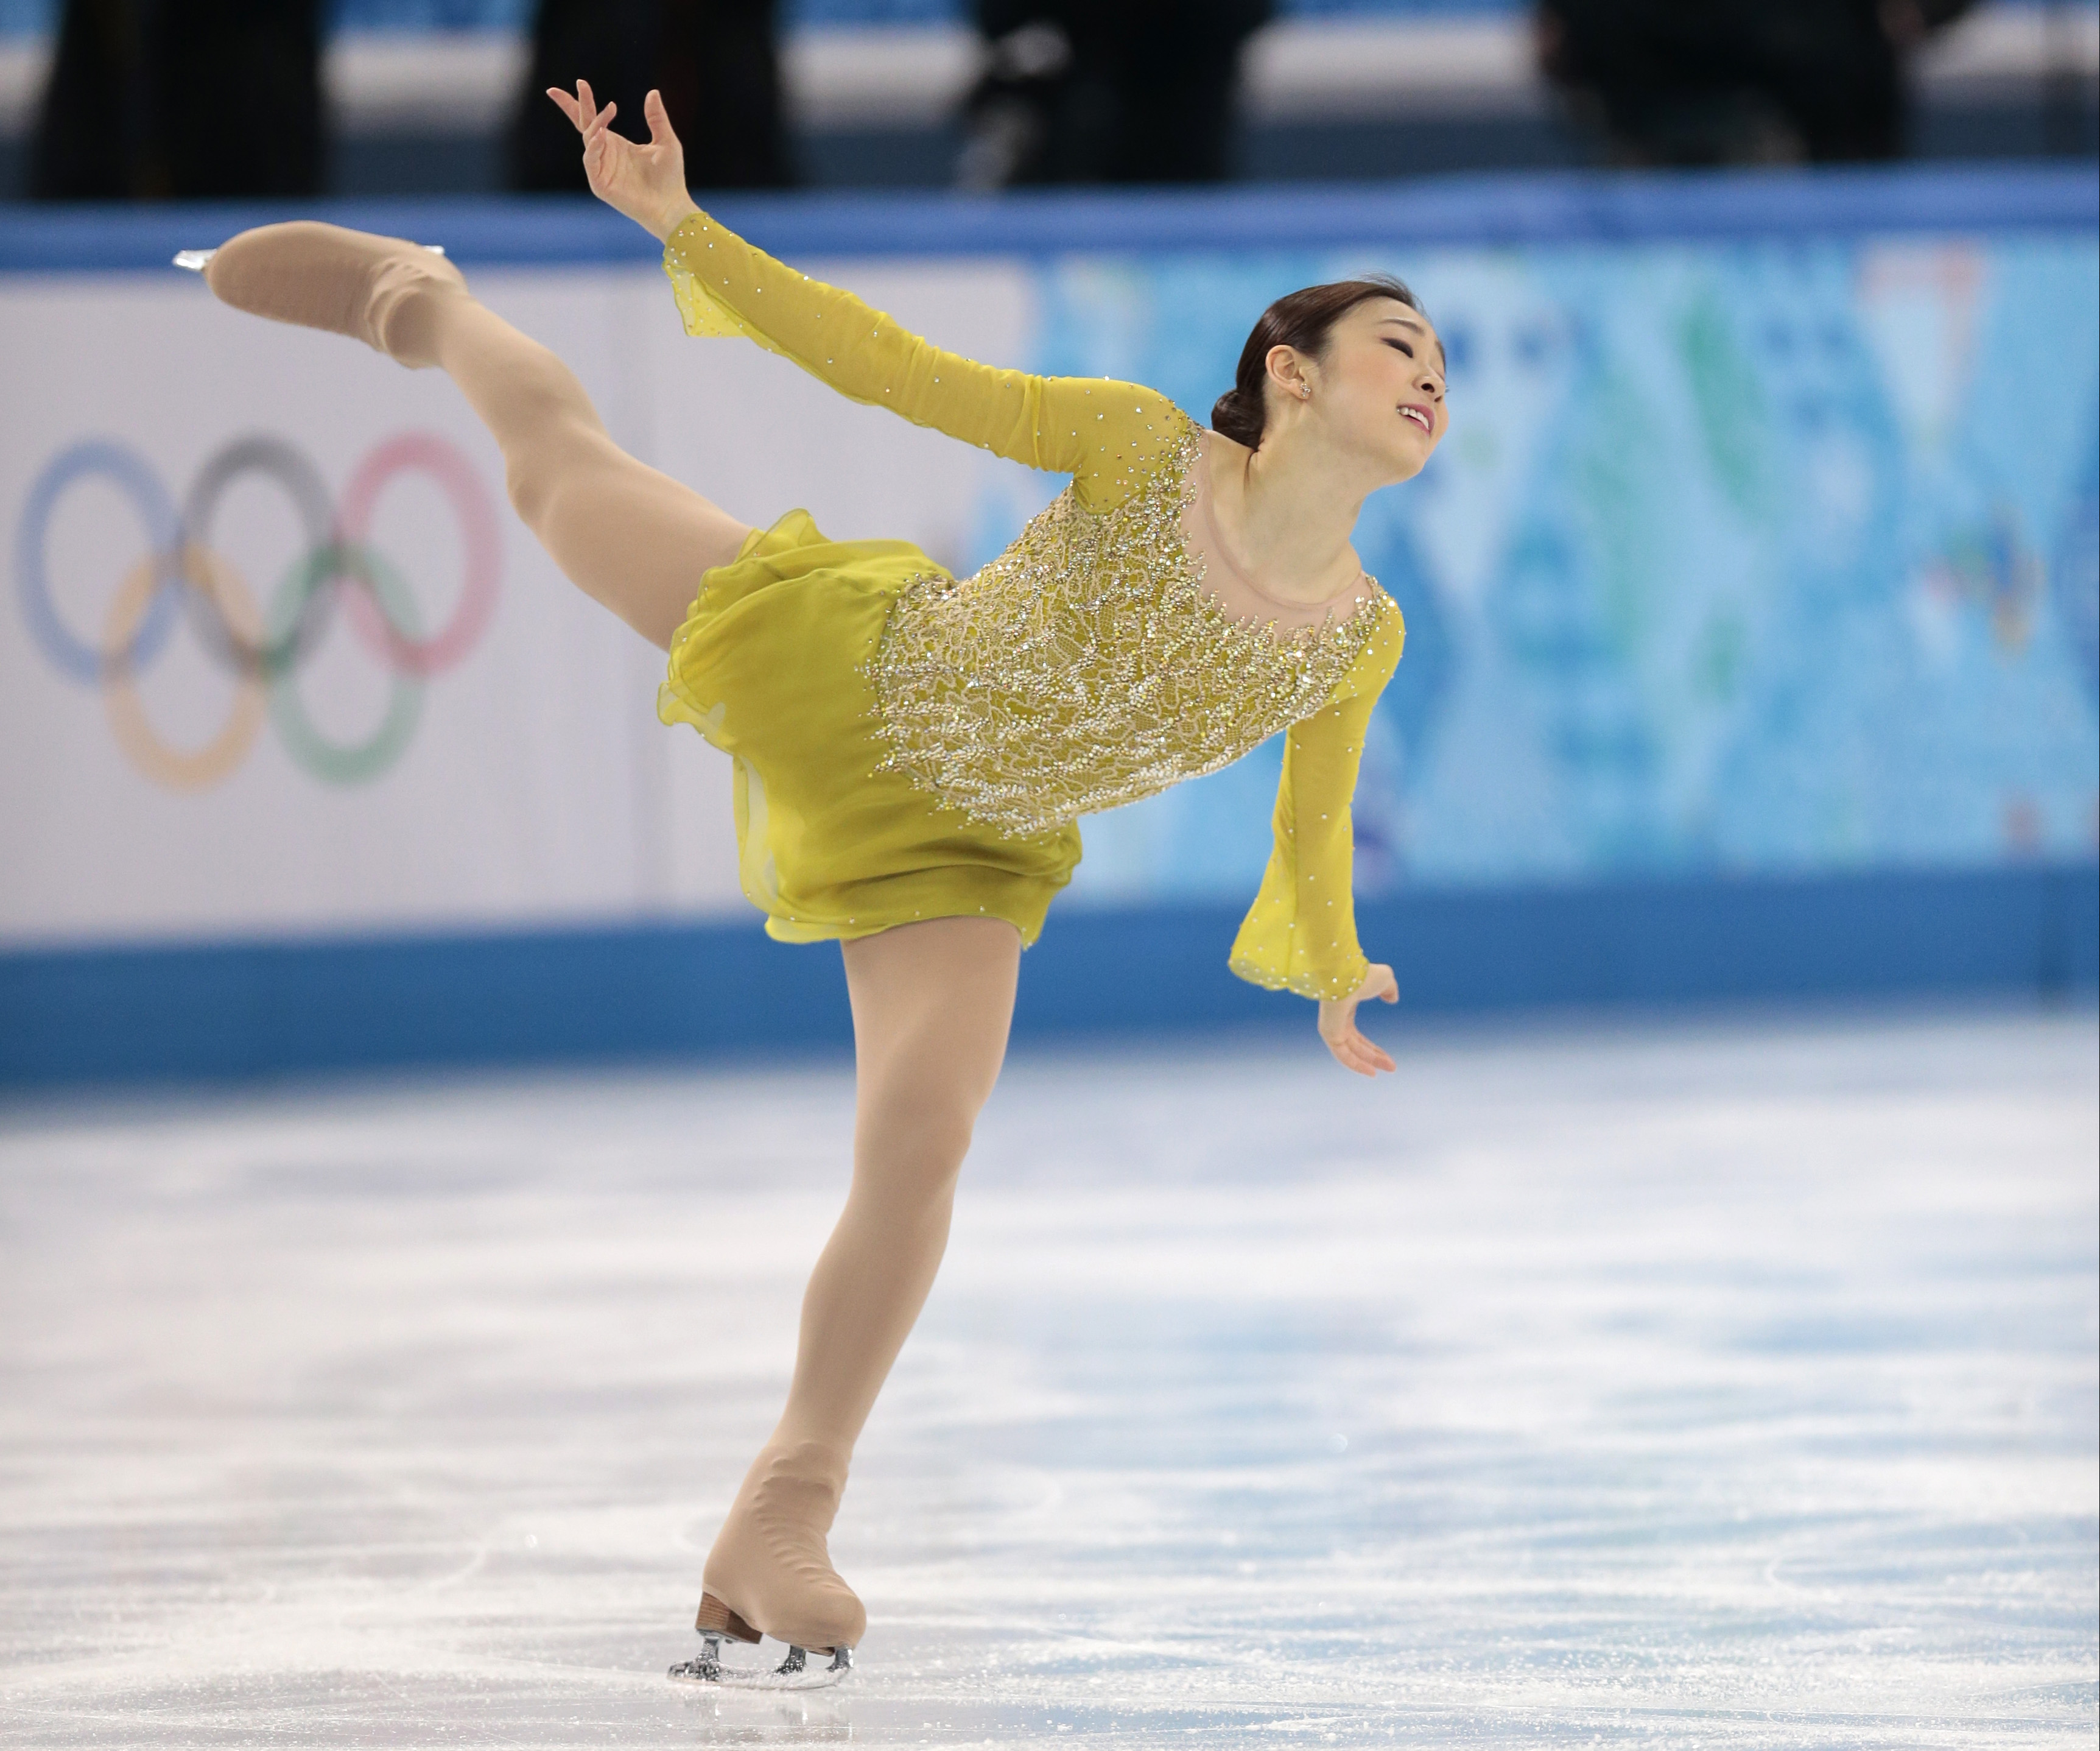 Kim Yuna of South Korea competes in the women's short program figure skating competition at the Iceberg Skating Palace during the 2014 Winter Olympics, Wednesday, Feb. 19, 2014, in Sochi, Russia. (AP Photo/Ivan Sekretarev)